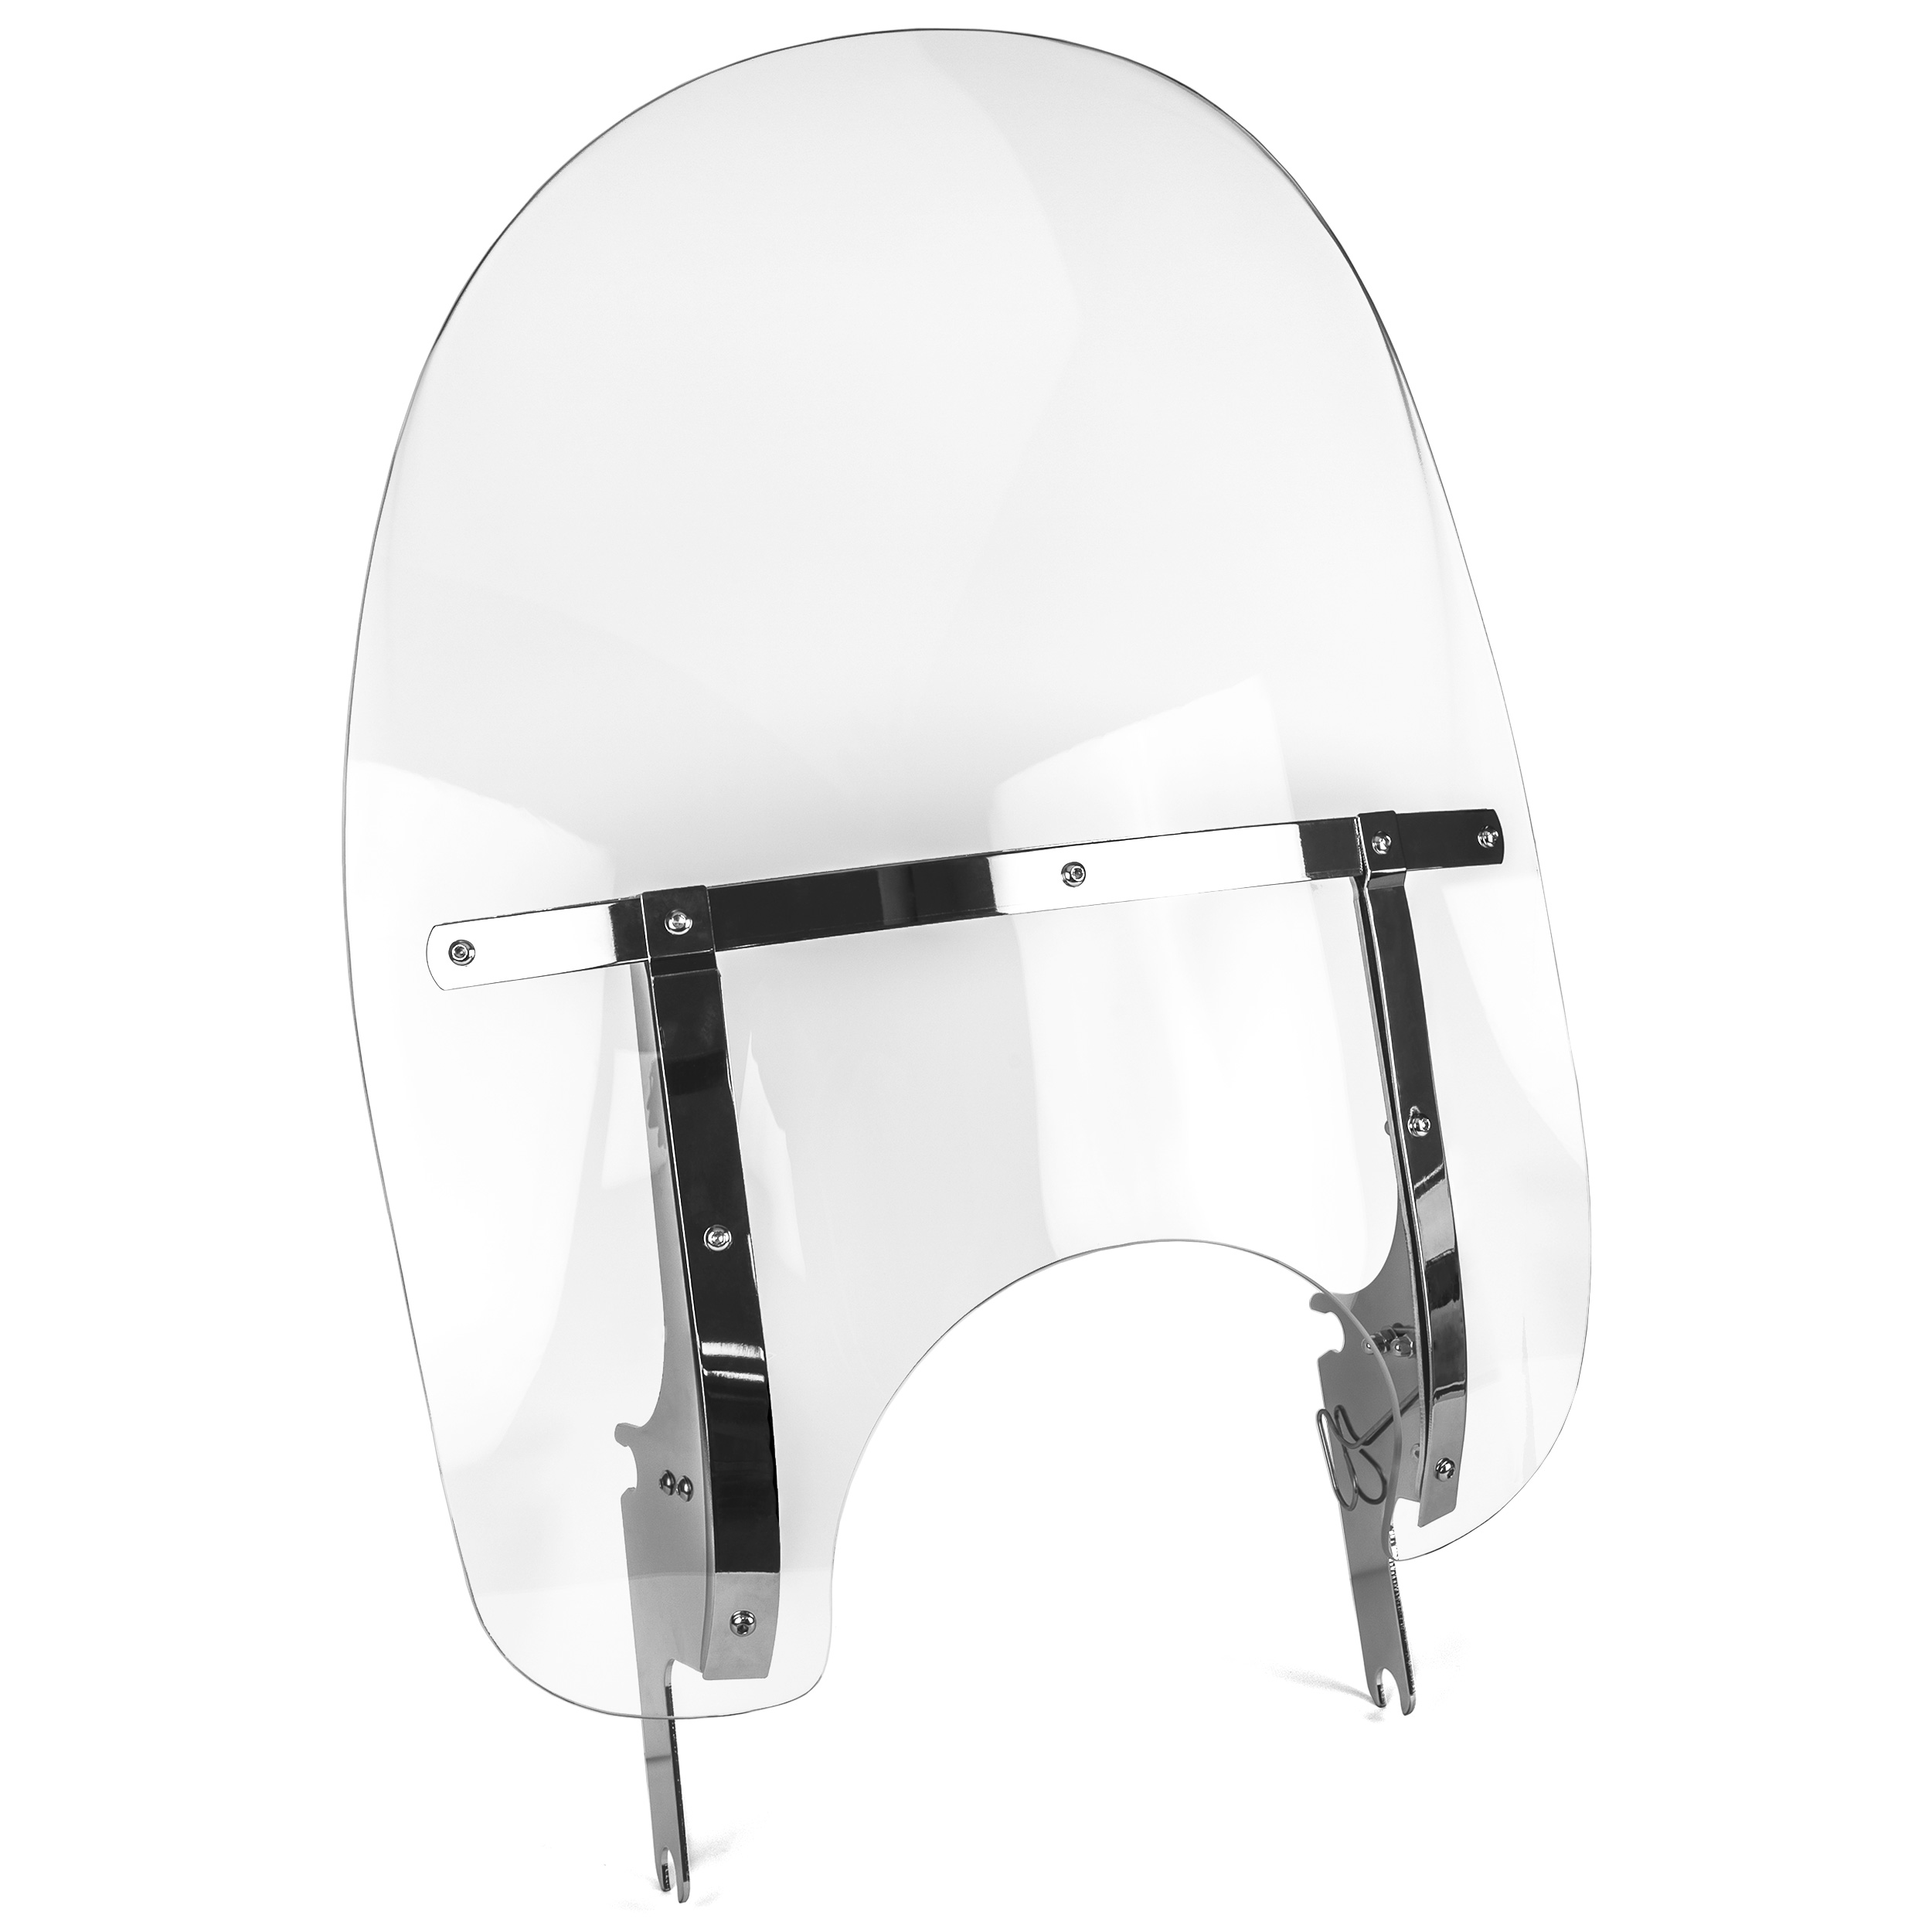 Krator Detachable Quick-Release Windshield Windscreen, Clear, Compatible with 2004-2007 Harley Davidson Road King Custom FLHRS, EFI